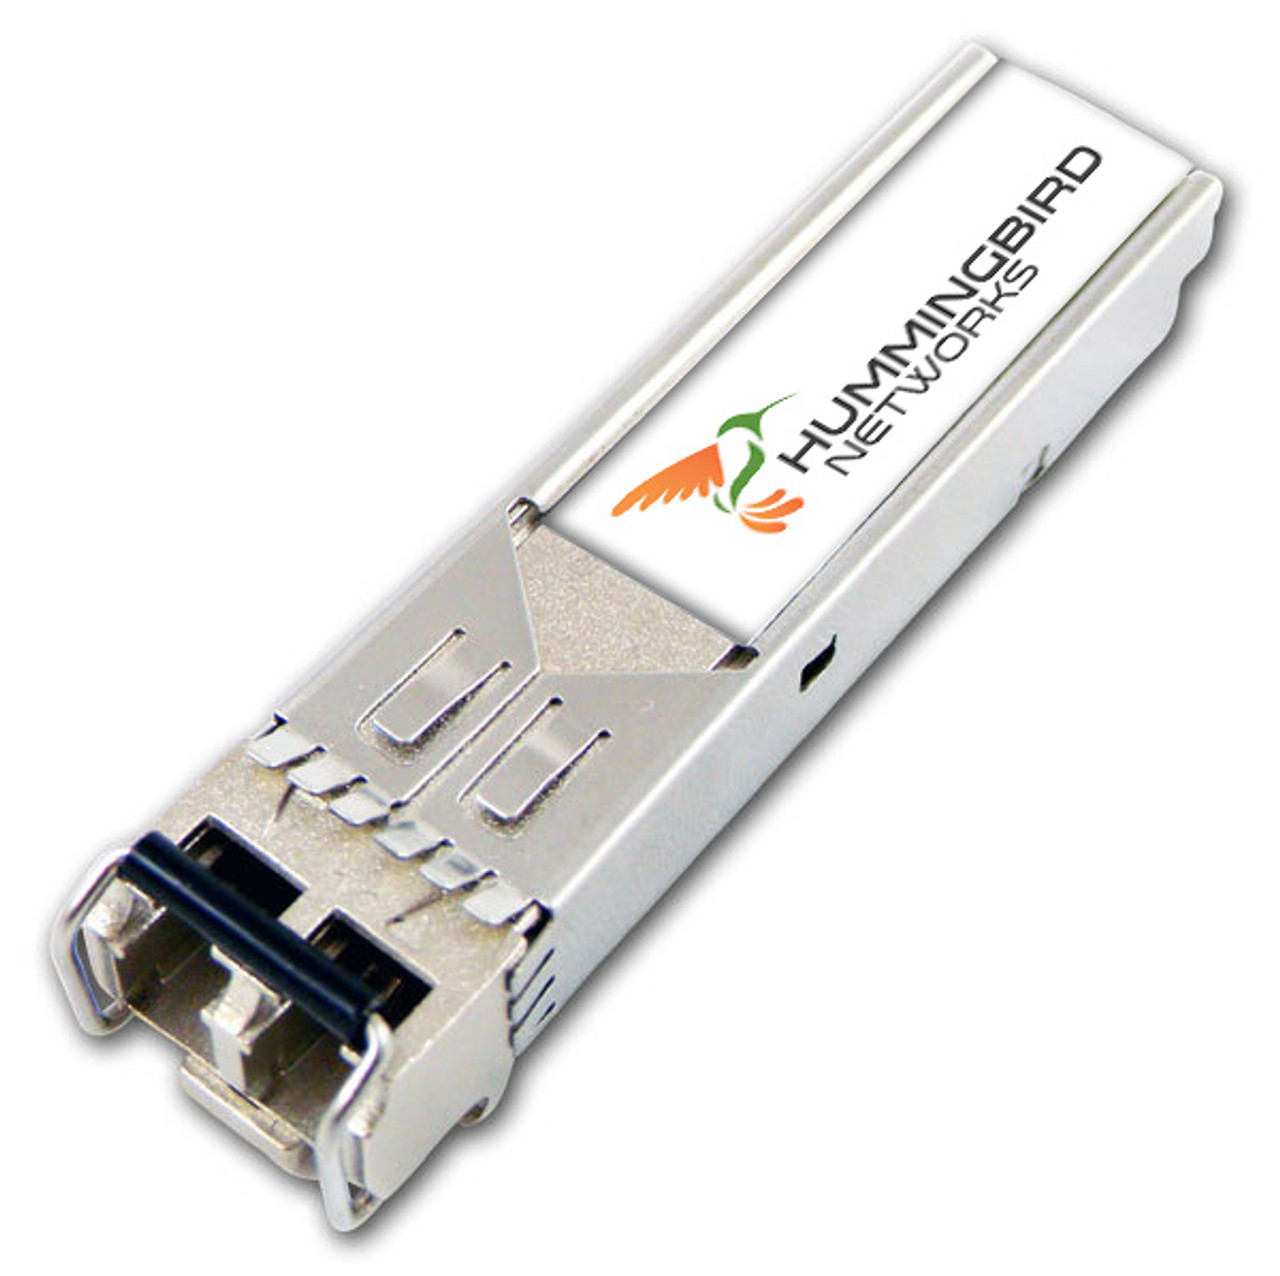 Hummingbird Networks Brand Compatible for Juniper QFX-SFP-10GE-SR SFP+ 10G  850NM 300M Hummingbird Networks